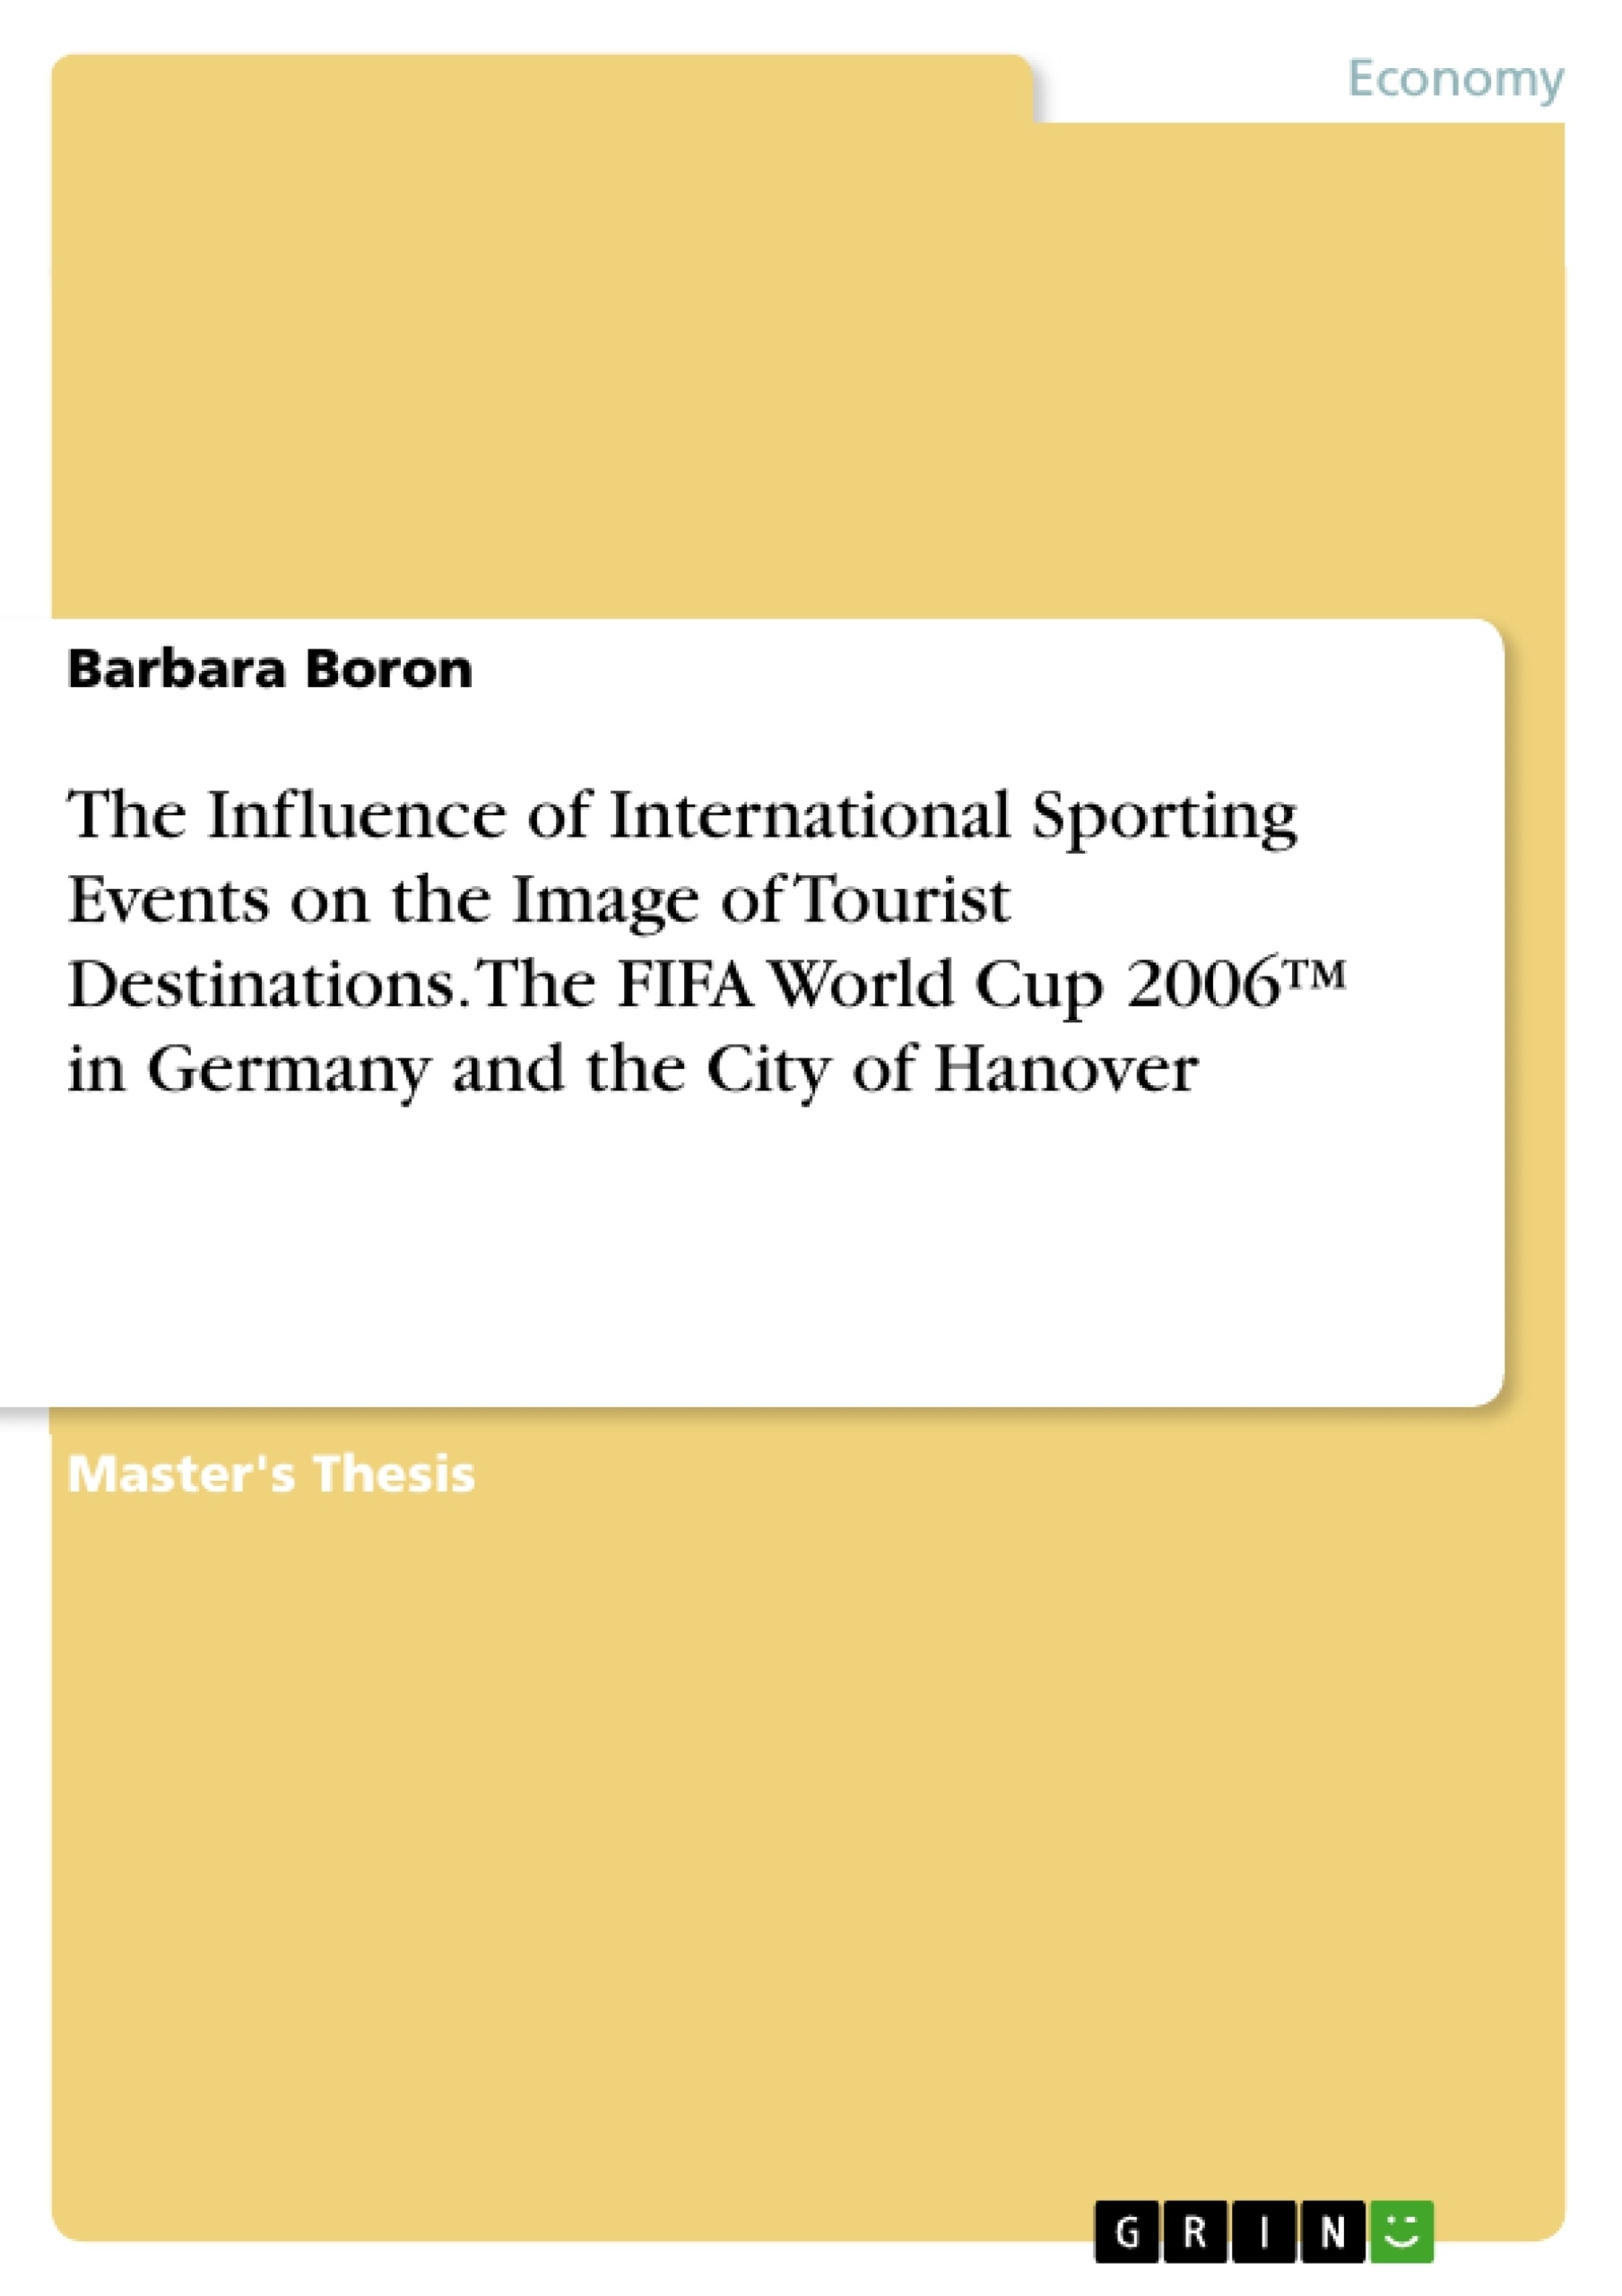 Title: The Influence of International Sporting Events on the Image of Tourist Destinations. The FIFA World Cup 2006™ in Germany and the City of Hanover